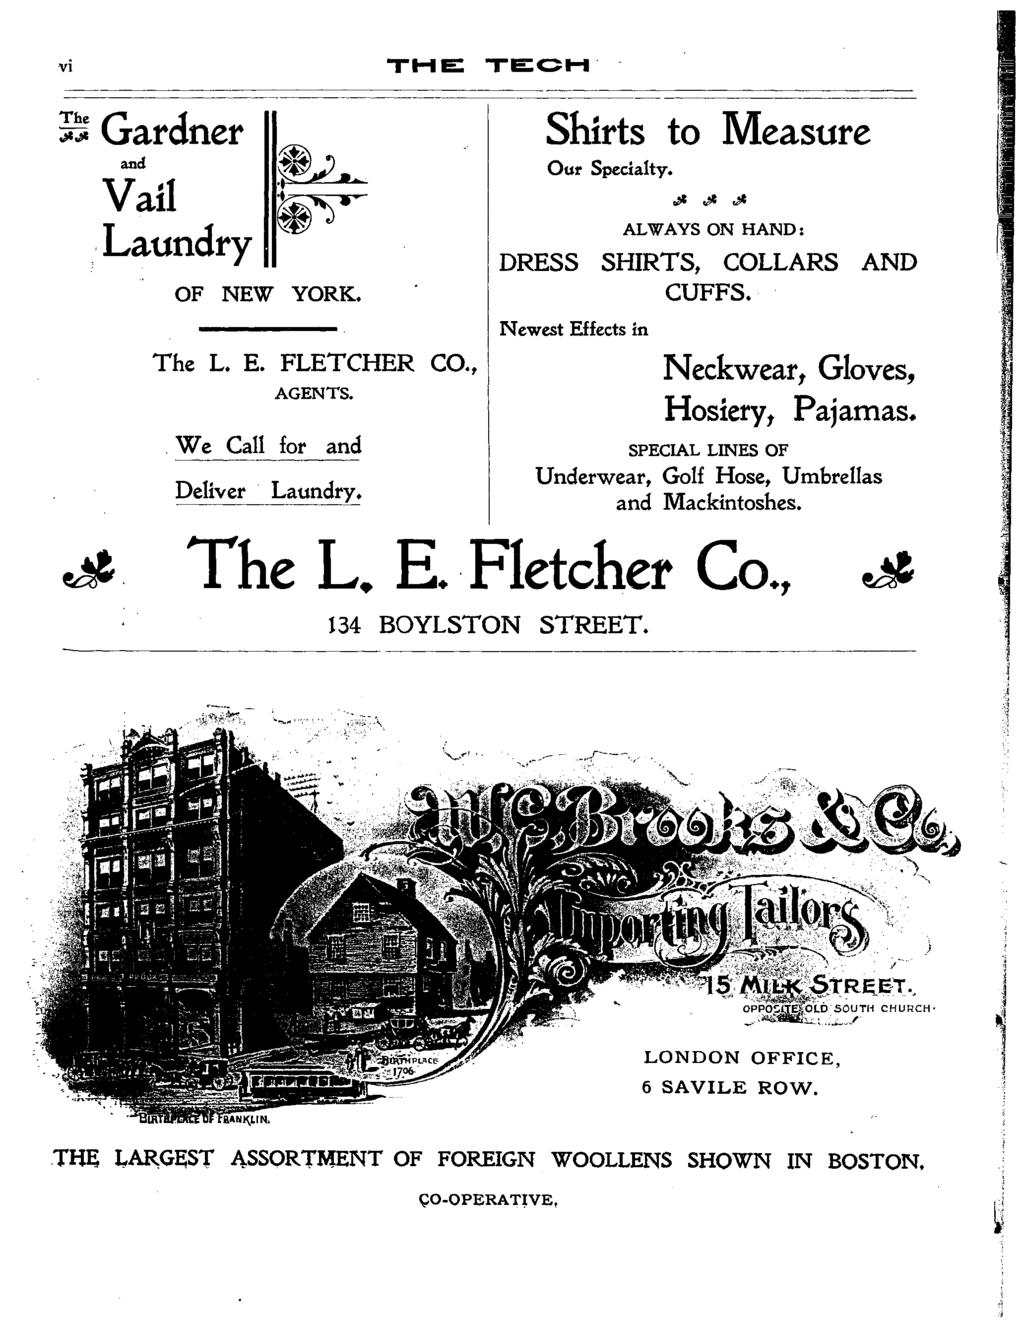 T- The Gardner ad Val Laundry O OF NEW YORK. Shrts to Measure Our Specalty. ALWAYS ON HAND: DRESS SHRTS, COLLARS AND CFFS. v v' X L Newest Effects n The L. E. FLETCHER CO., AGENTS.